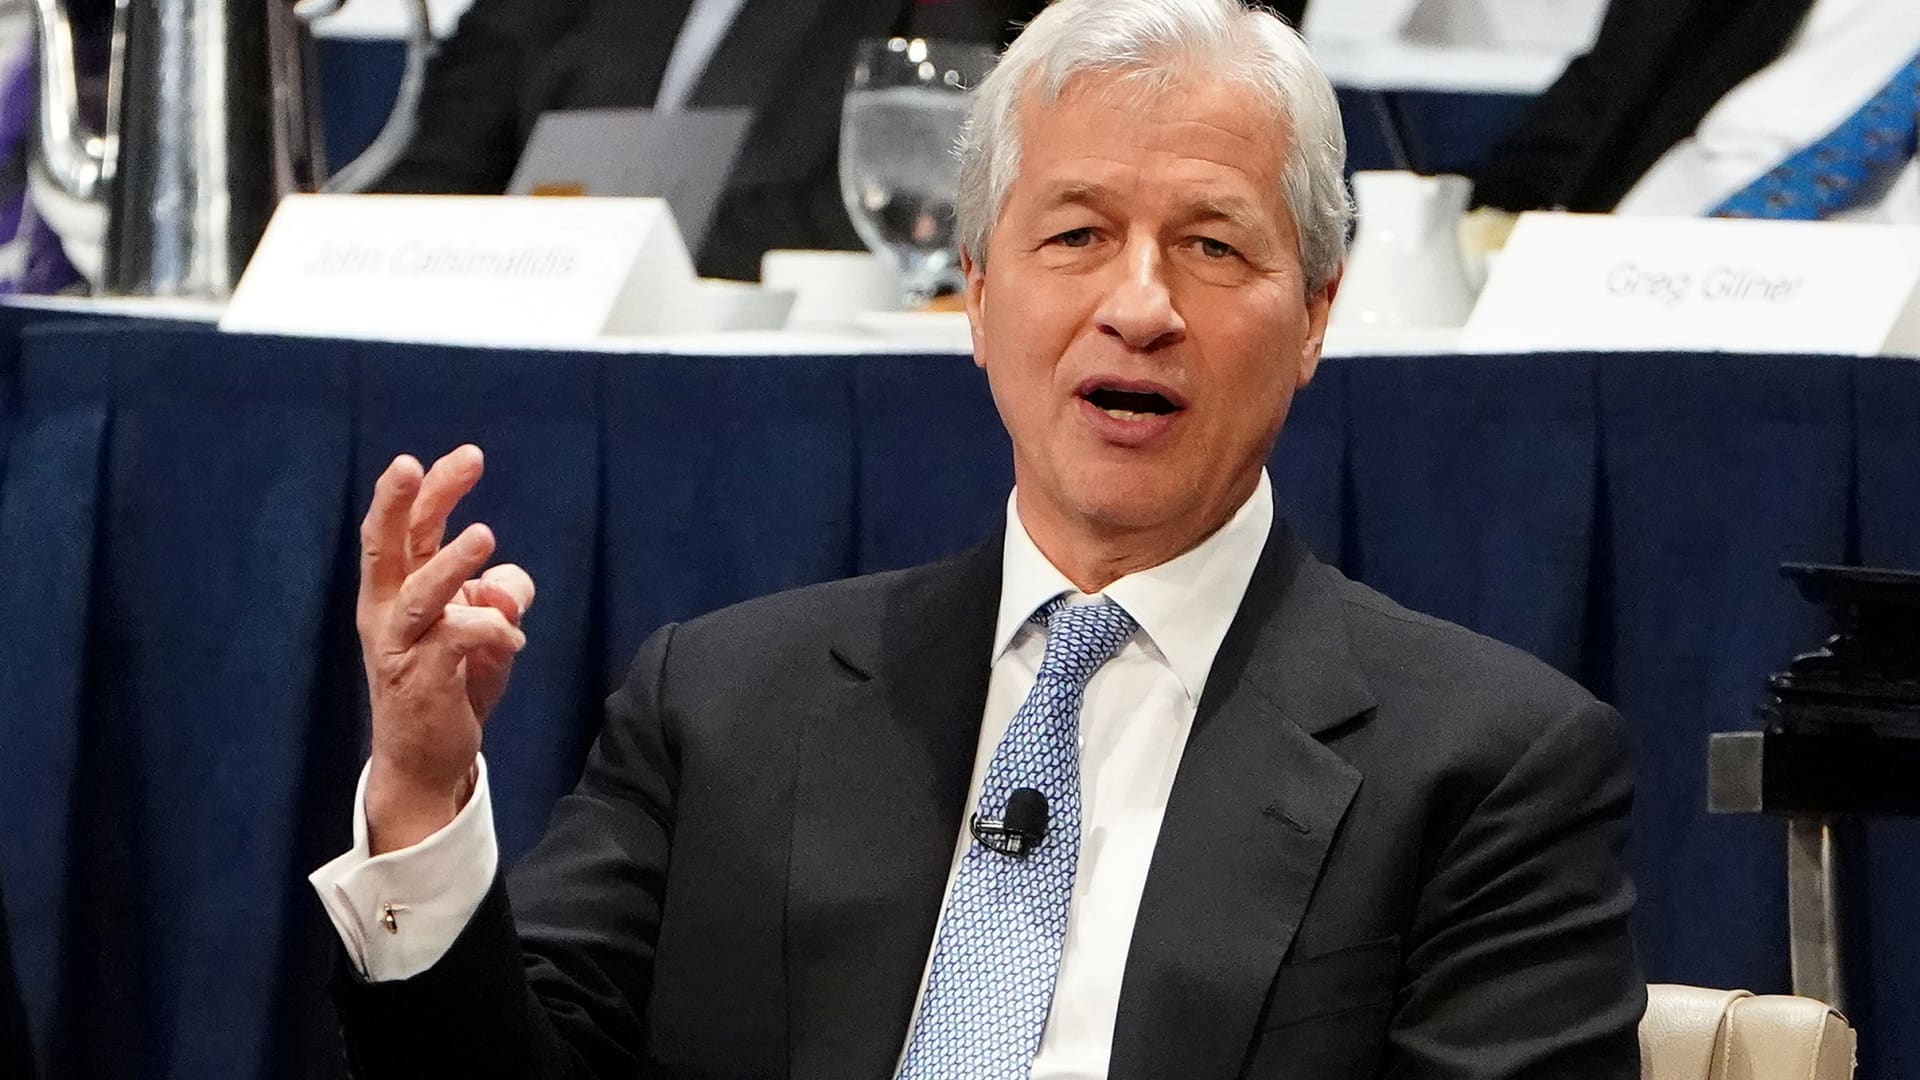 Jamie Dimon, CEO of JPMorgan Chase speaks to the Economic Club of New York in New York, January 16, 2019.